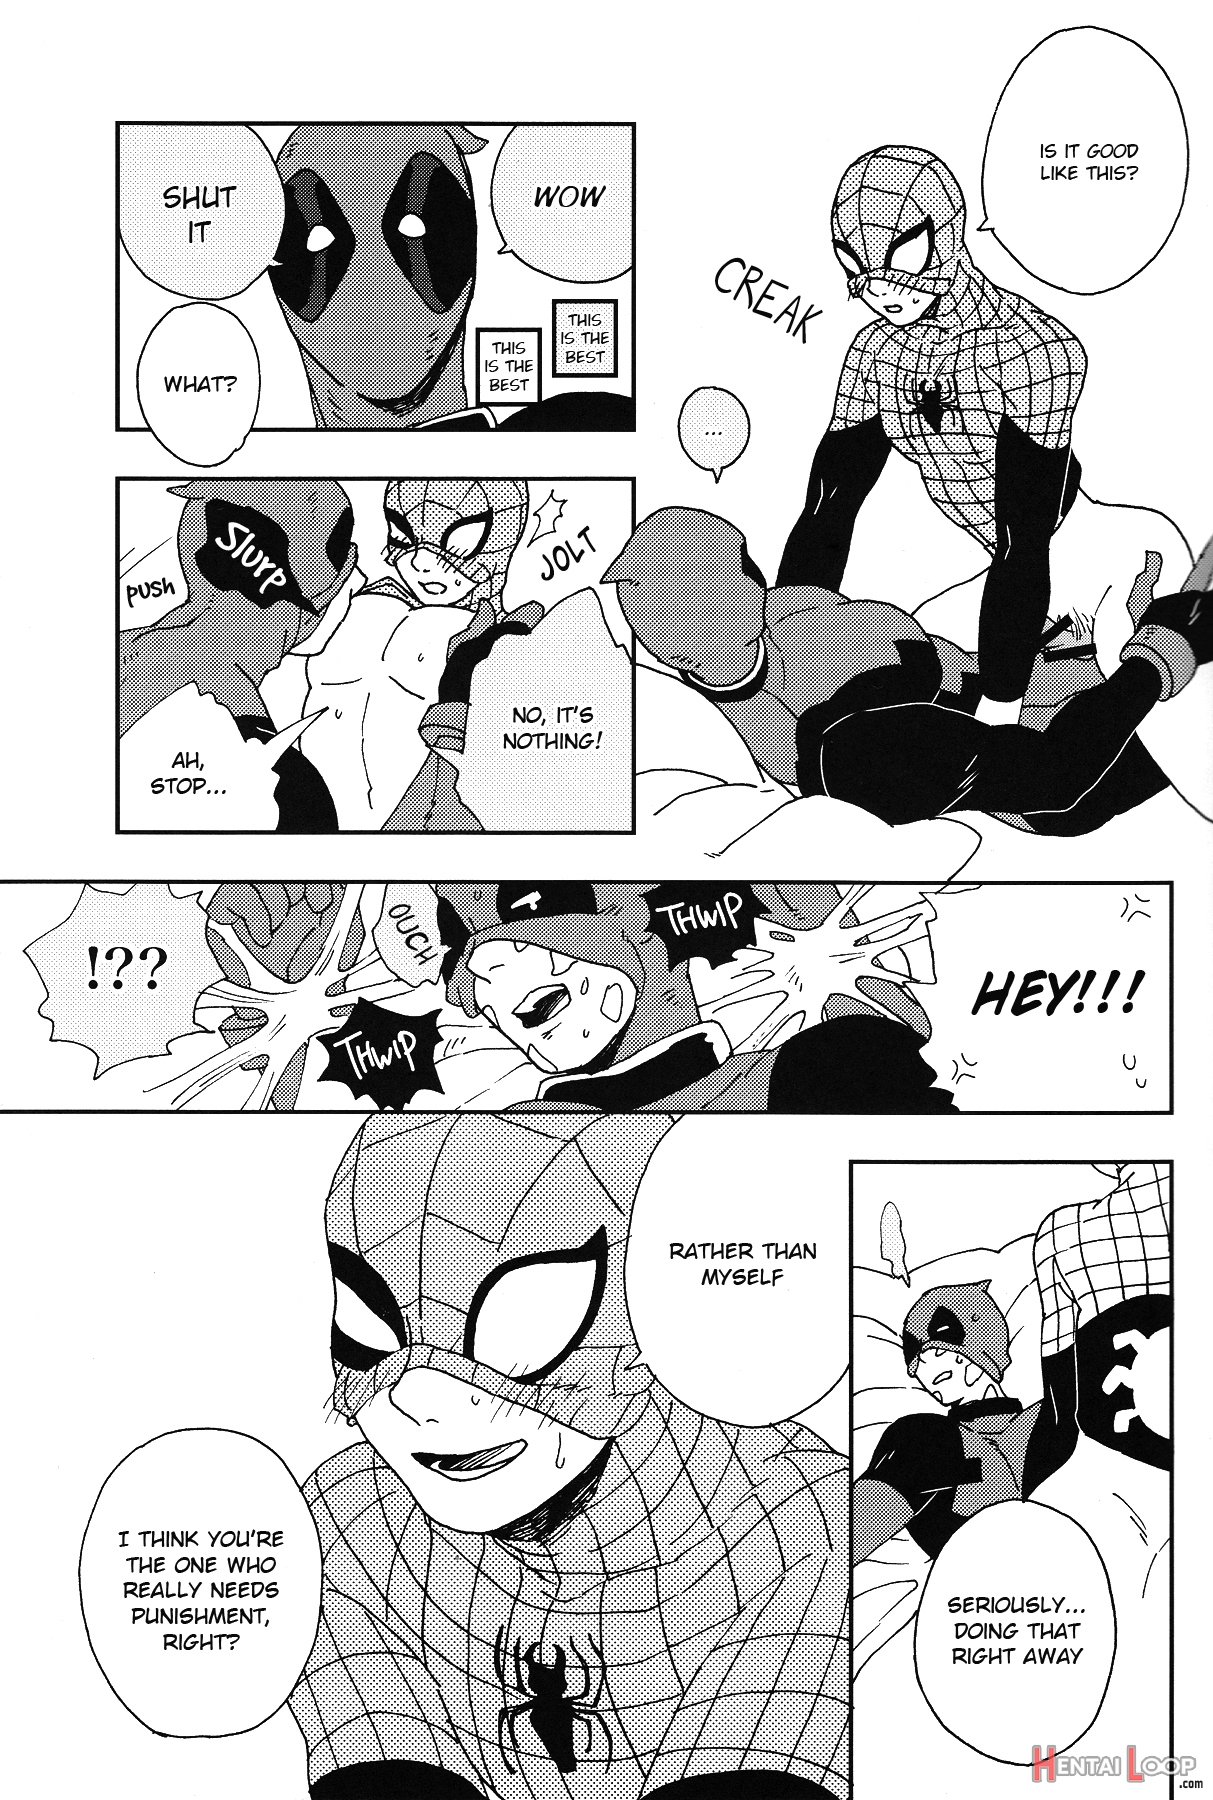 Naughty Spidey page 10